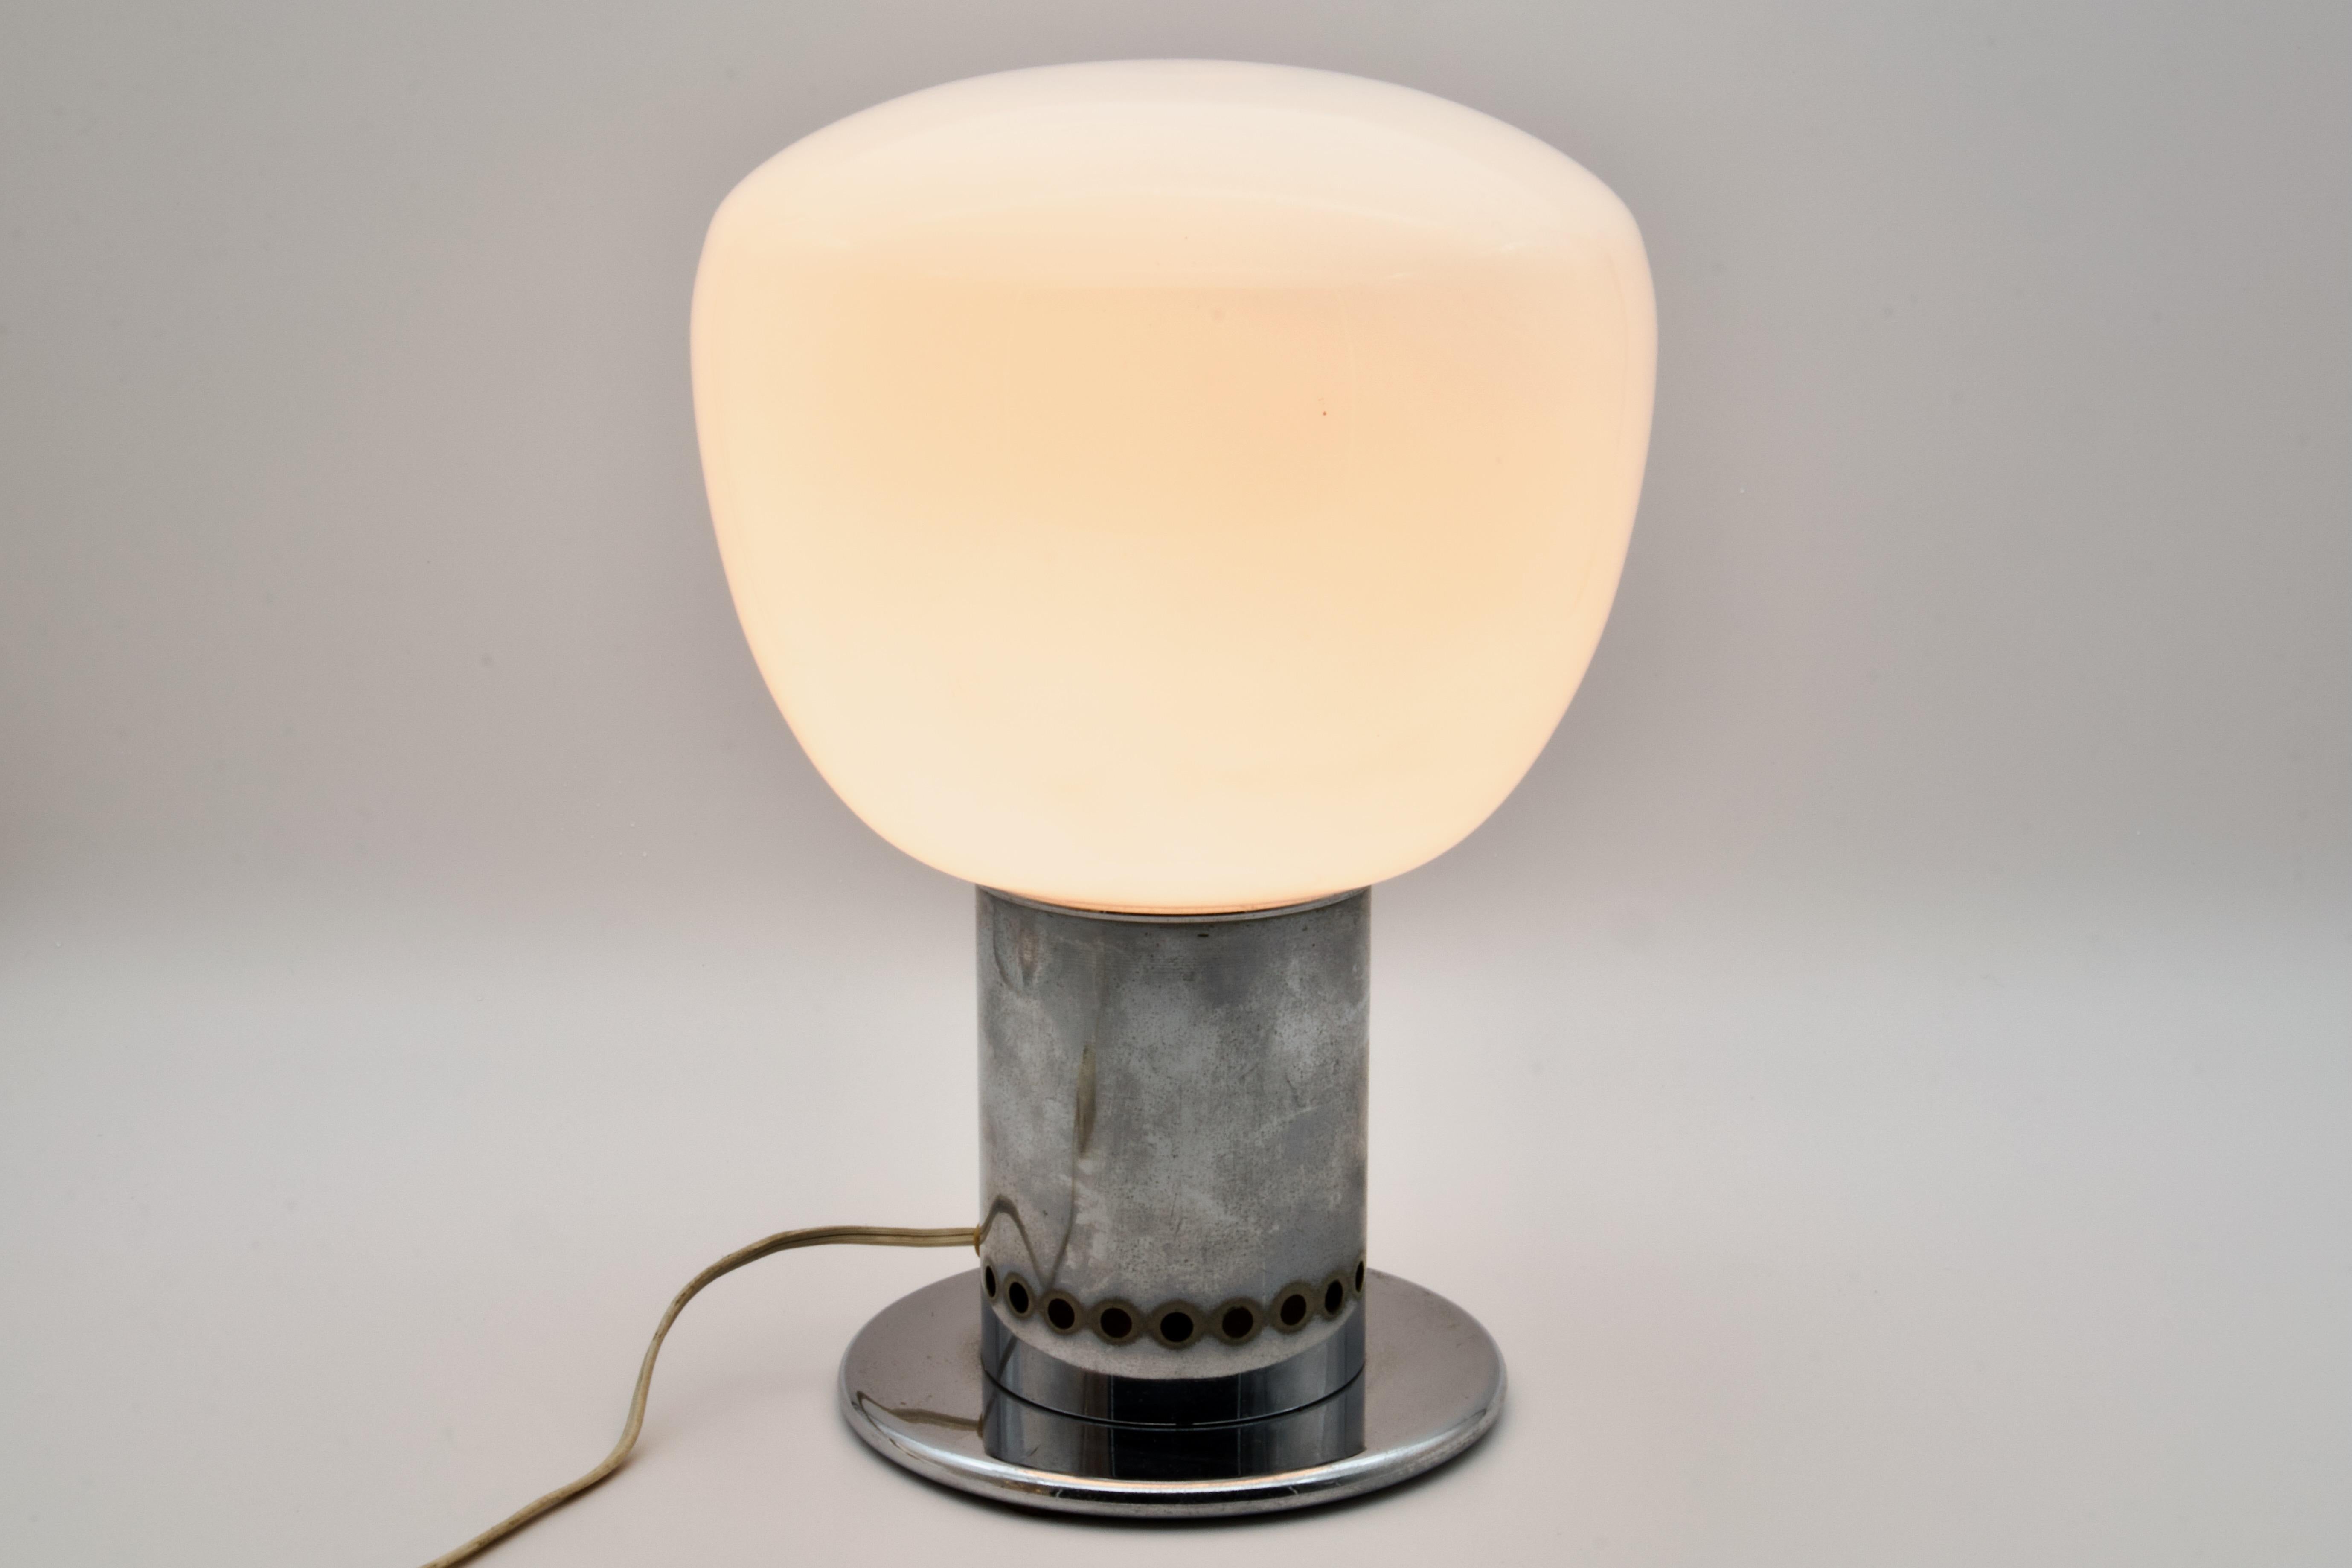 Extraordinary and beautiful, This hand blown Mid-Century Modern Murano art glass table lamp was made by Mazzega, Italy in the 1970s. It was designed by Carlo Nason and / or Toni Zuccheri. The lamp is suitable as a table lamp or a floor lamp.

It